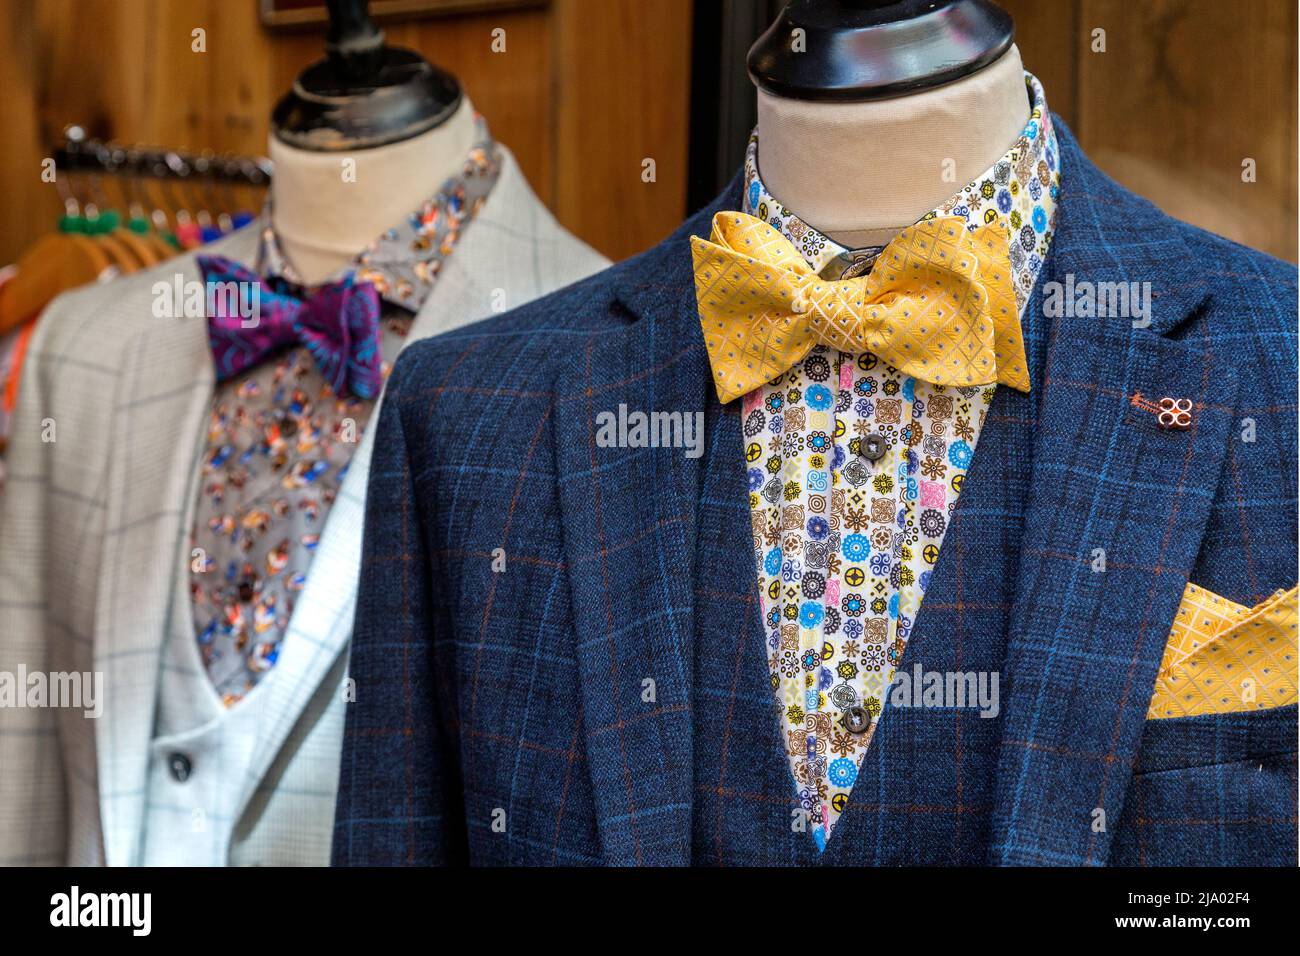 Very smart men's suits for sale in a high street shop. Concept of fashion industry, retail or high street spend. Stock Photo